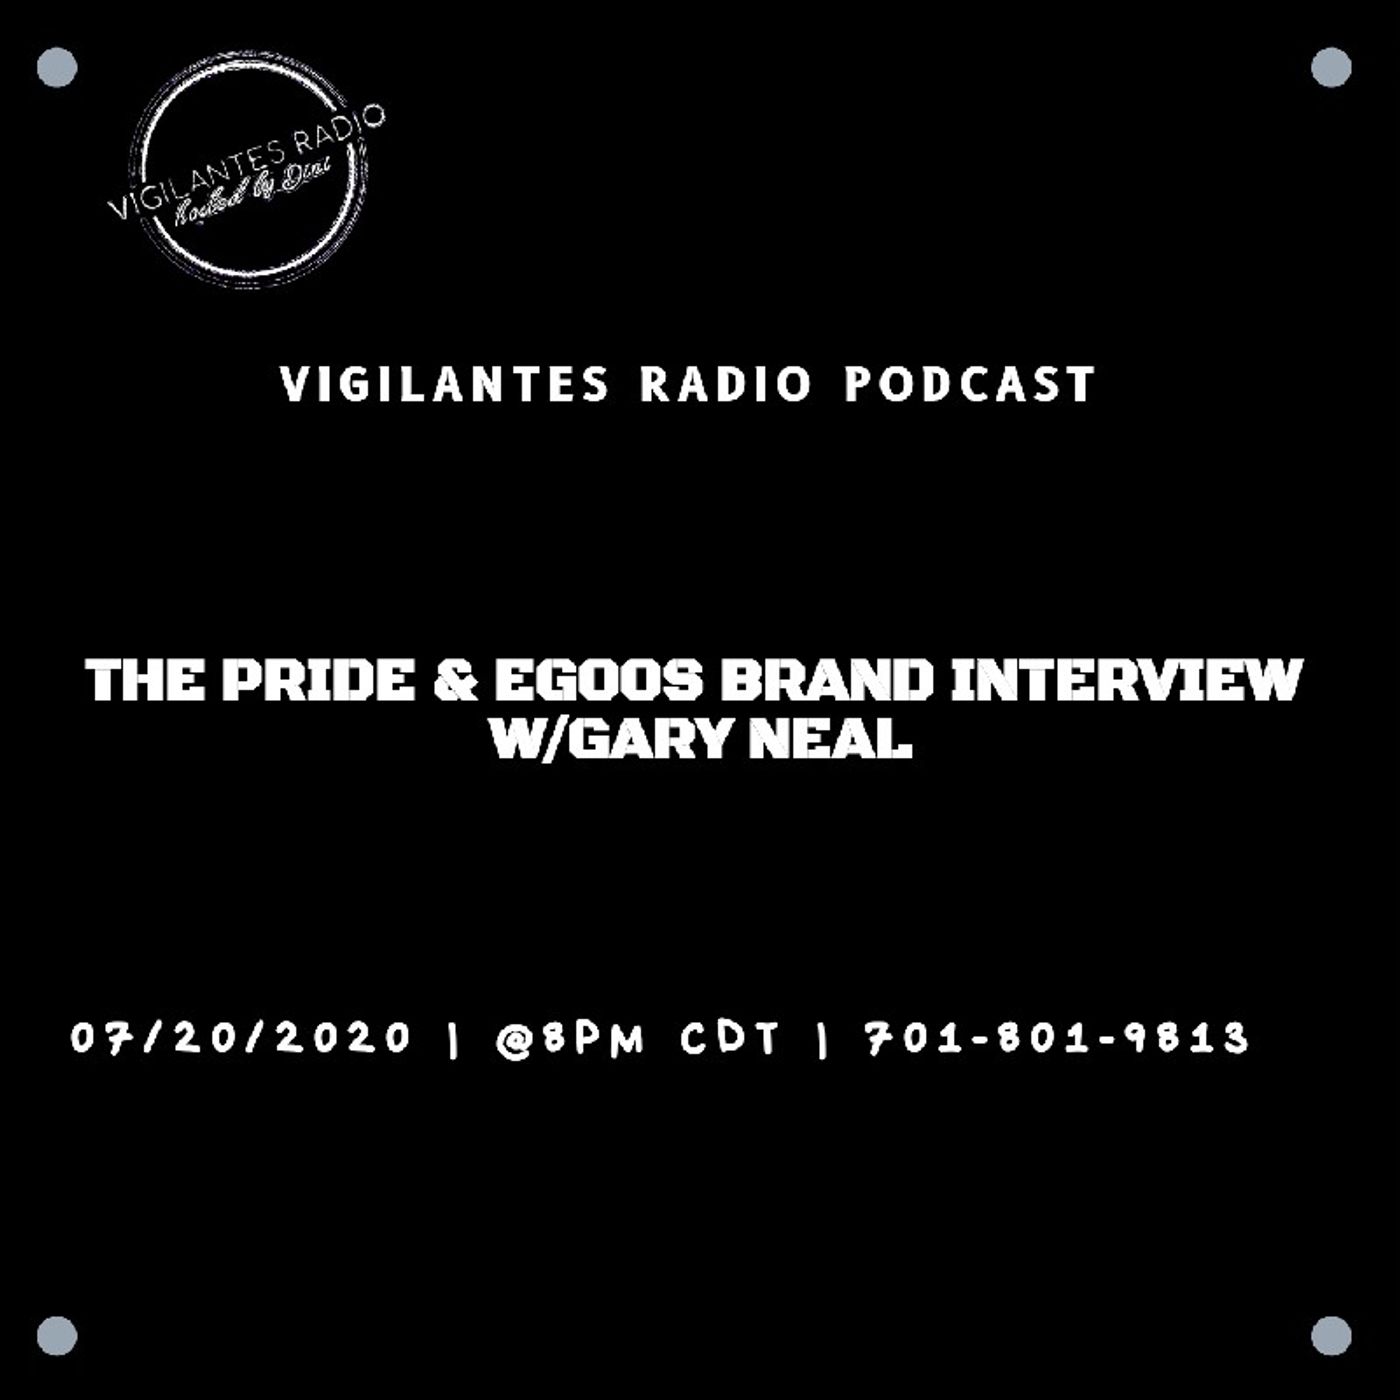 The Pride & Egoos Brand Interview w/Gary Neal. Image